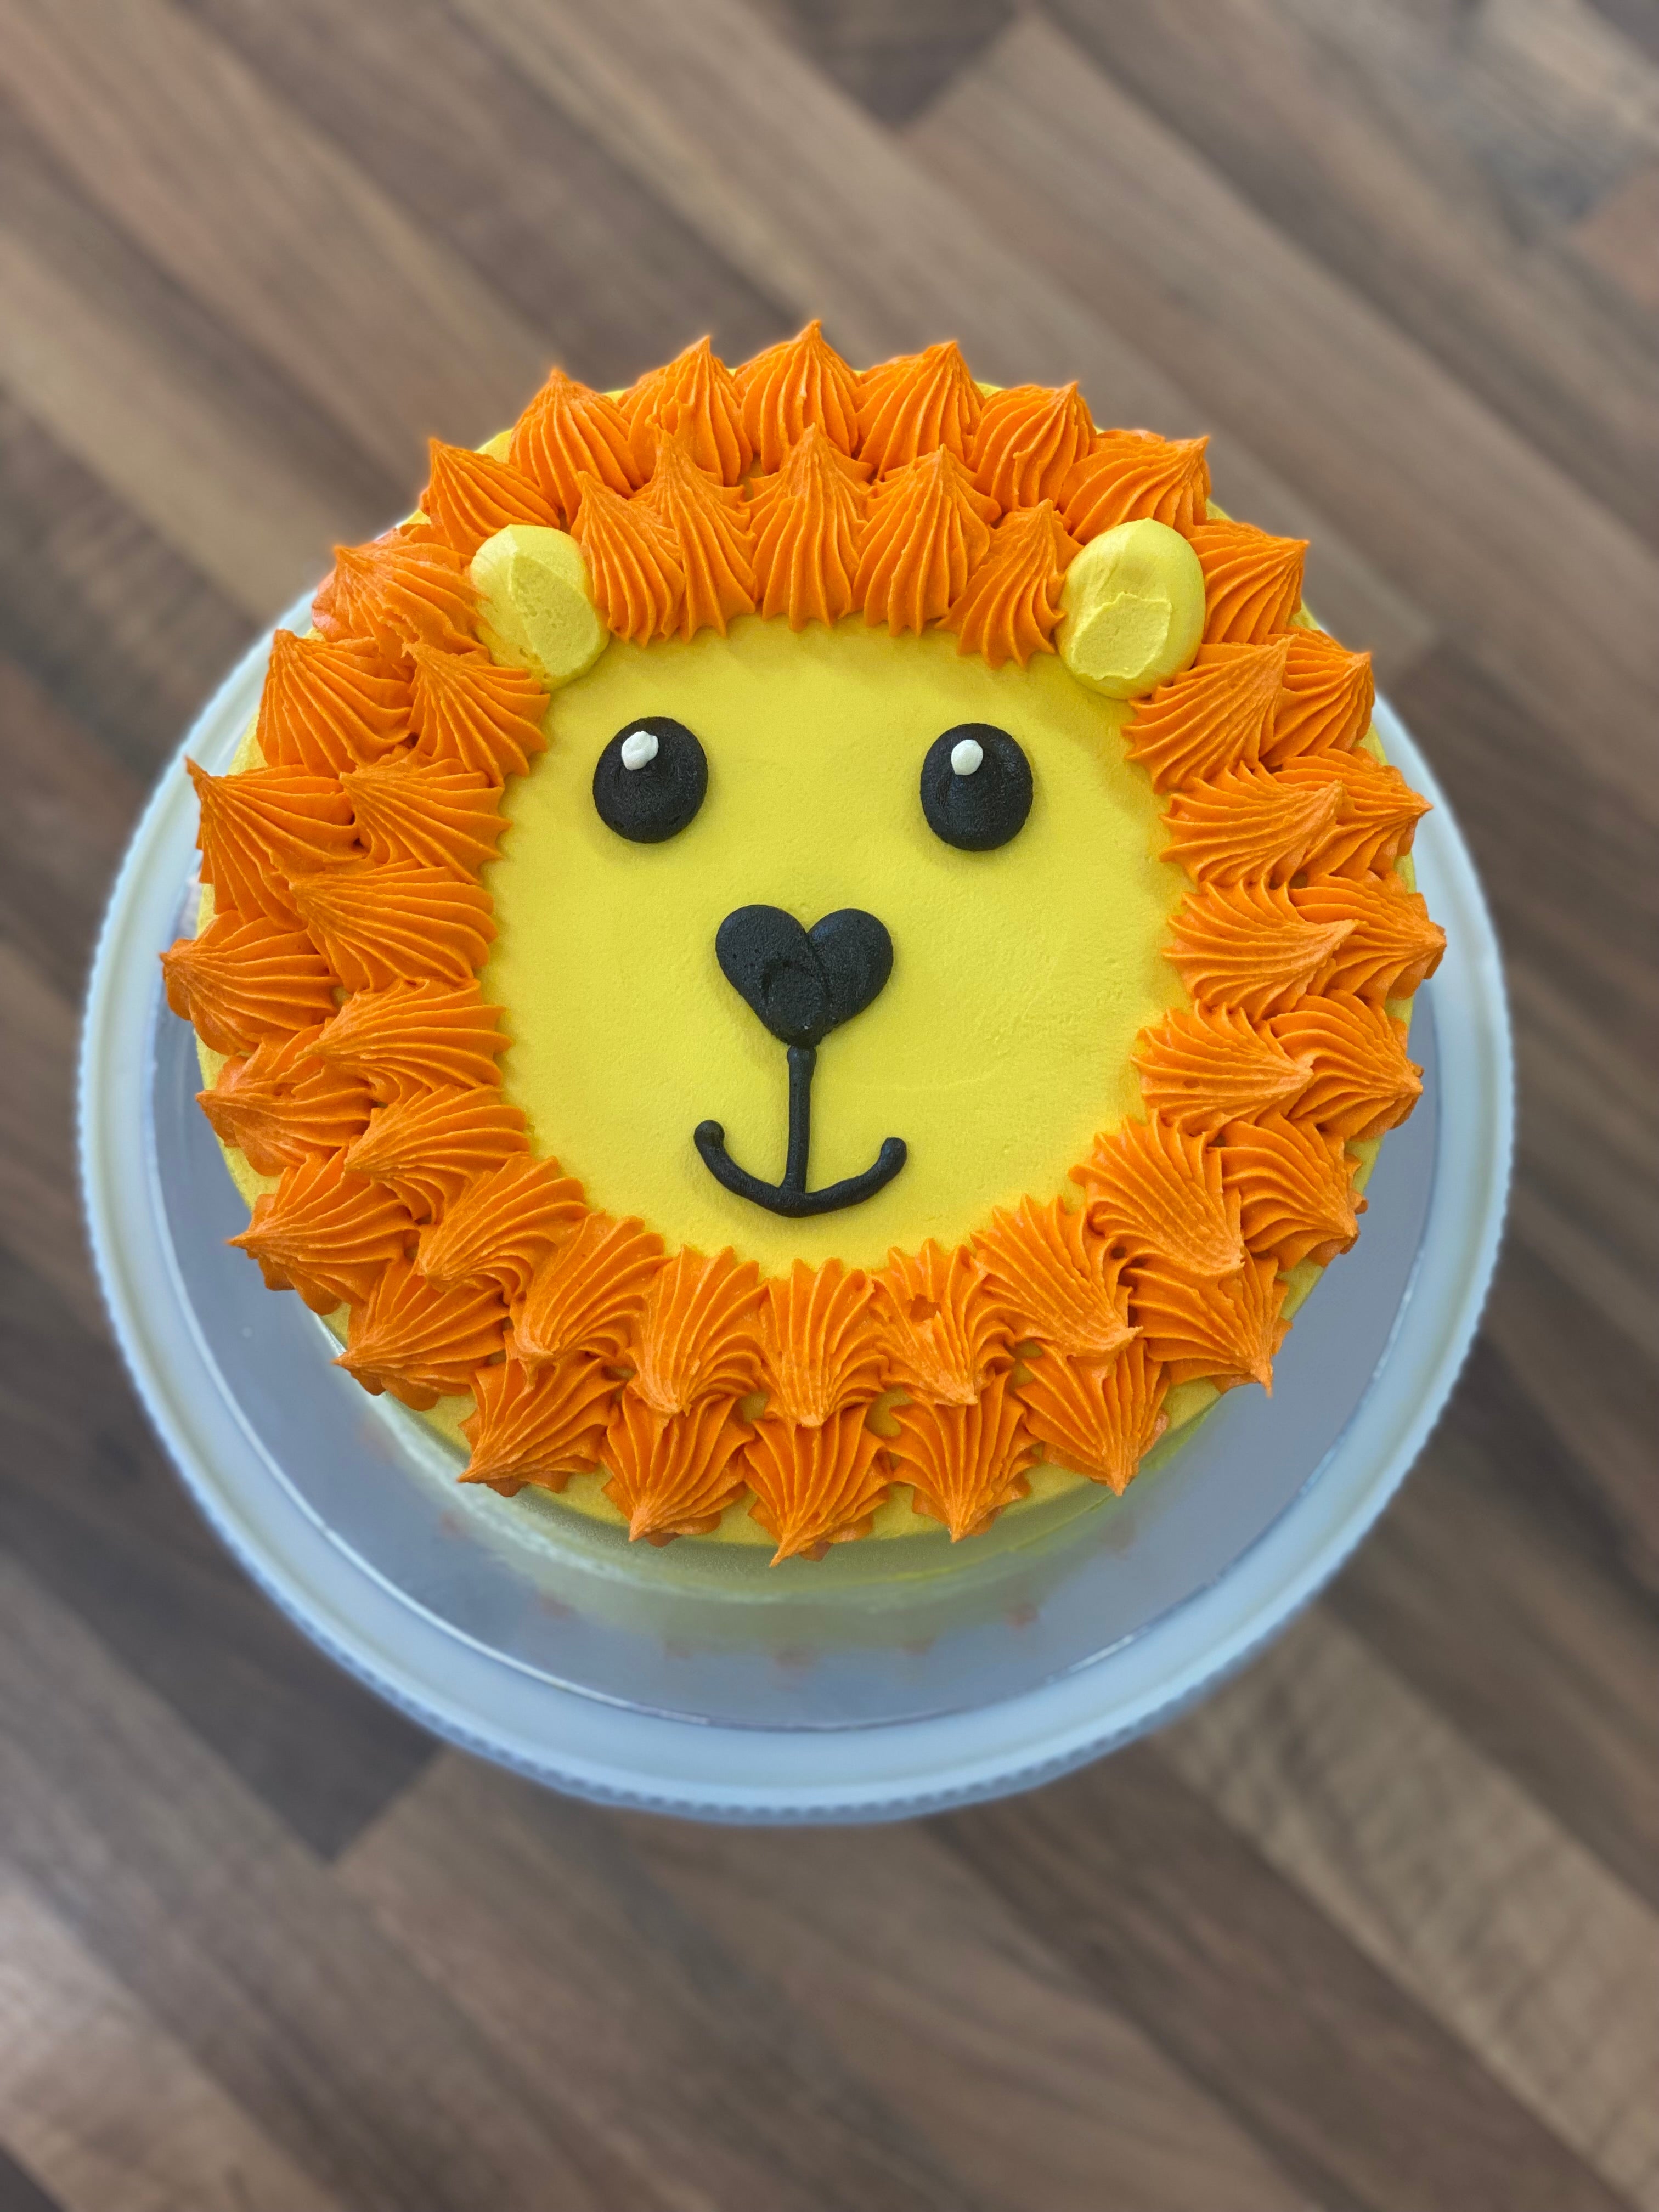 Smiley Cake | The Home Bakery